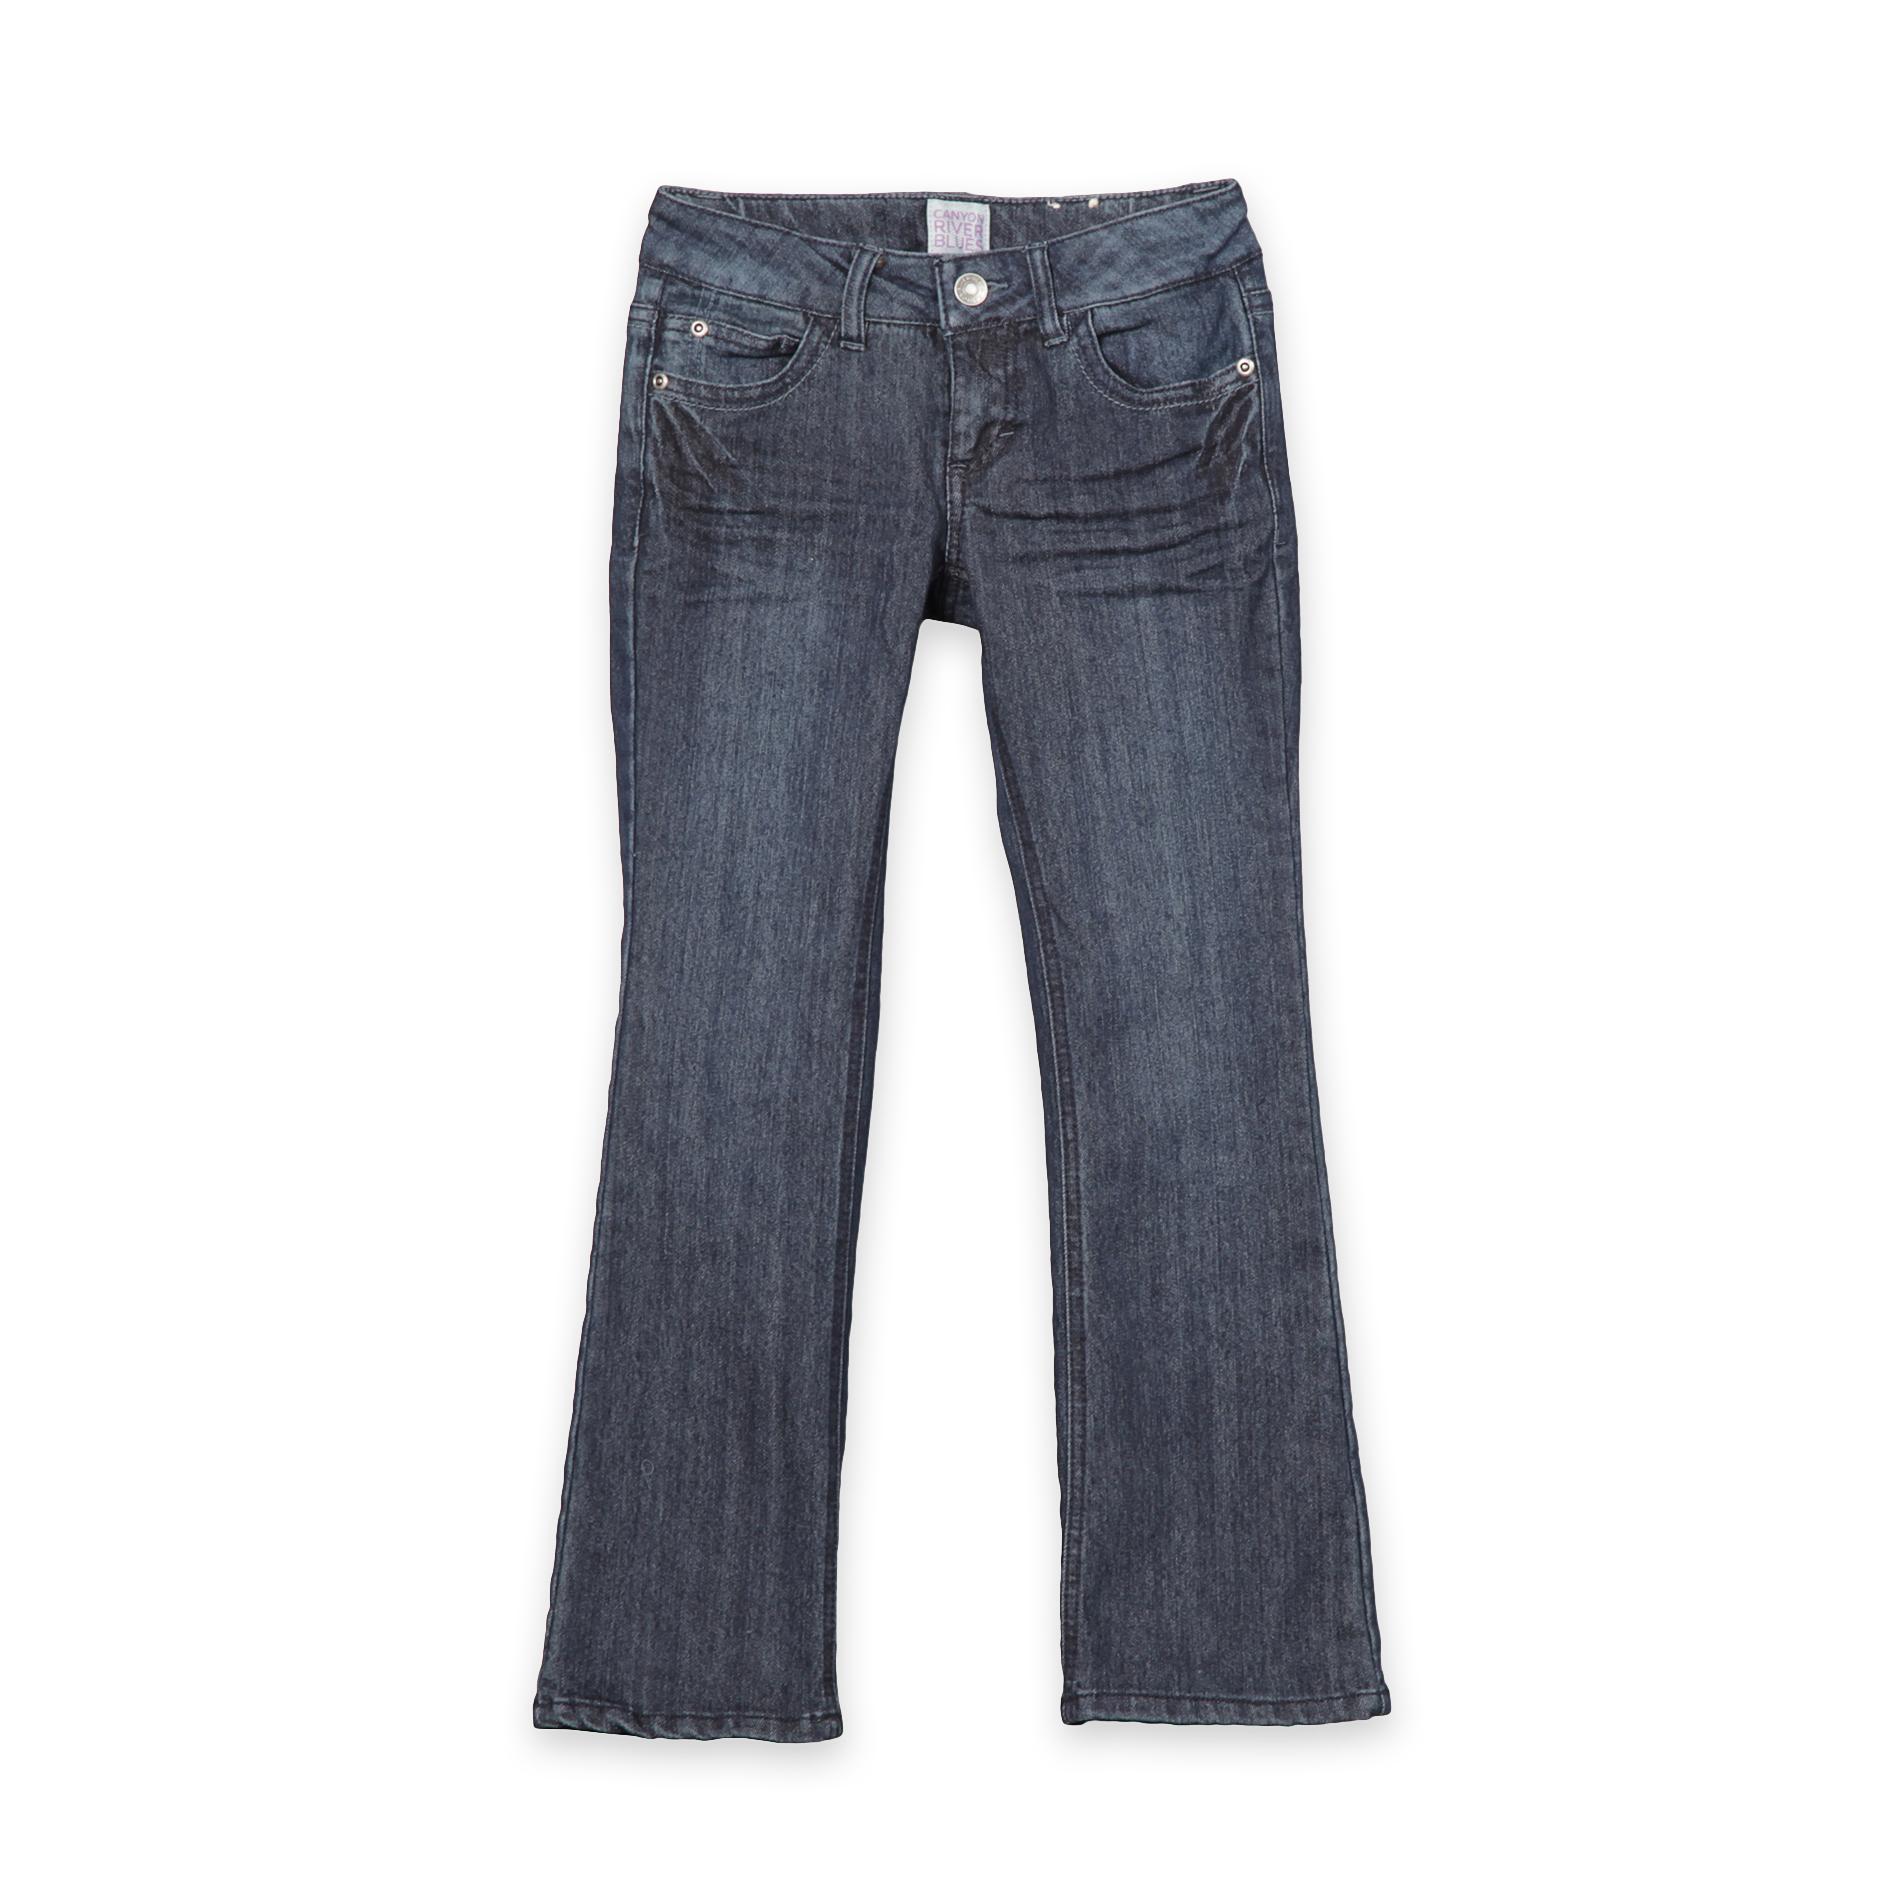 Canyon River Blues Girl's Skinny Bootcut Jeans